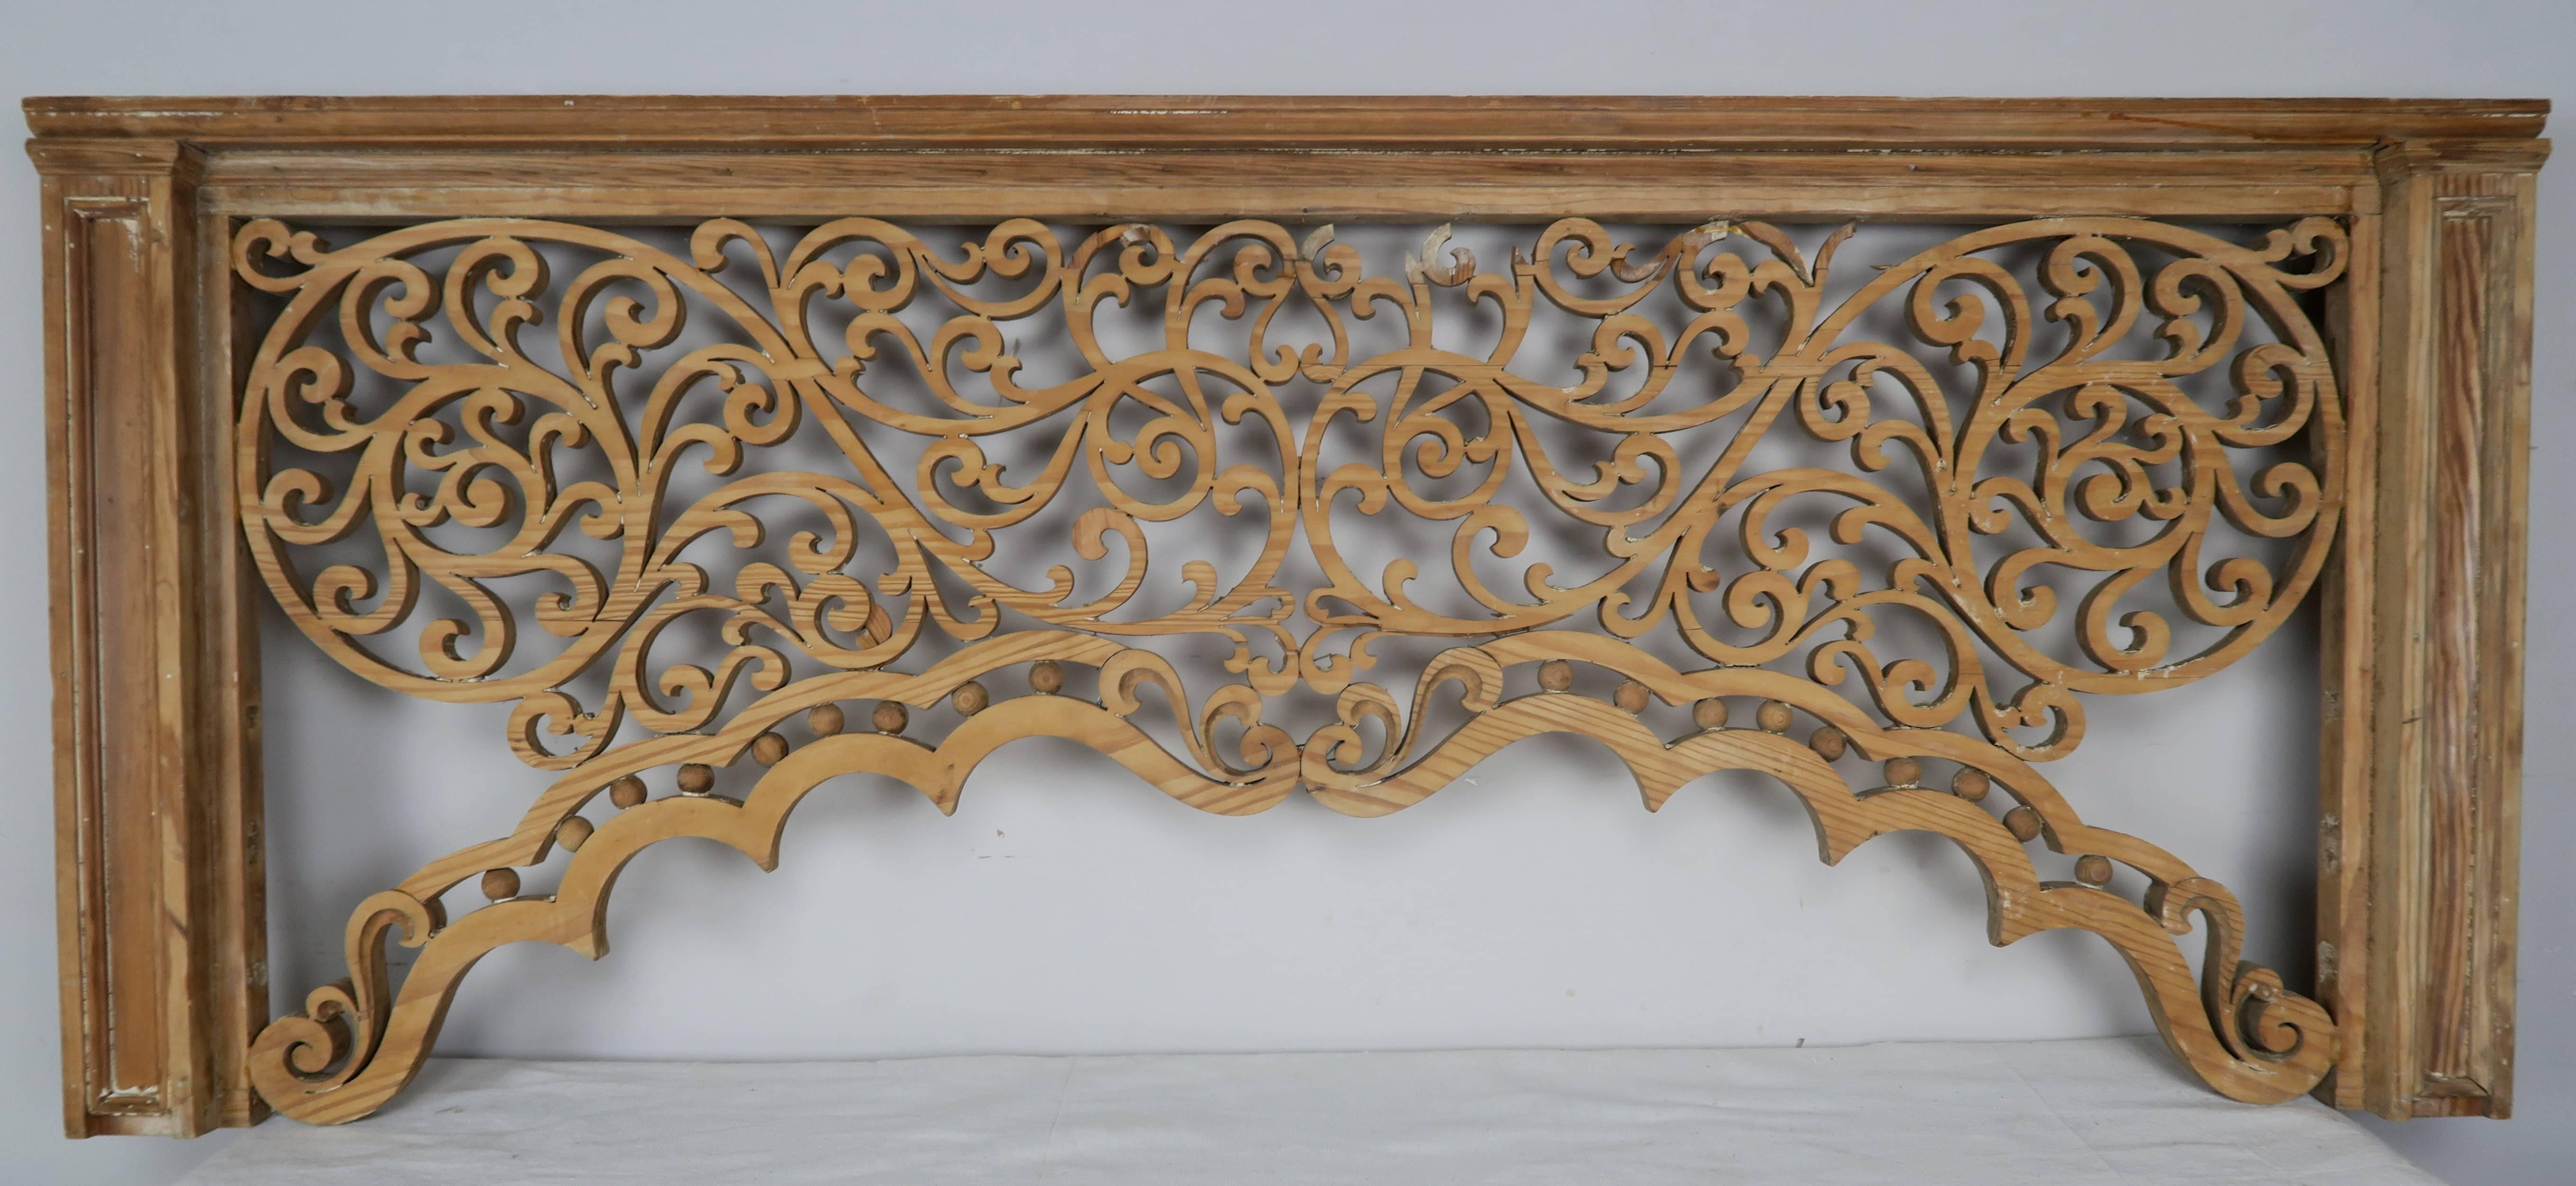 Carved Wood Scrolled Architectural Piece 1